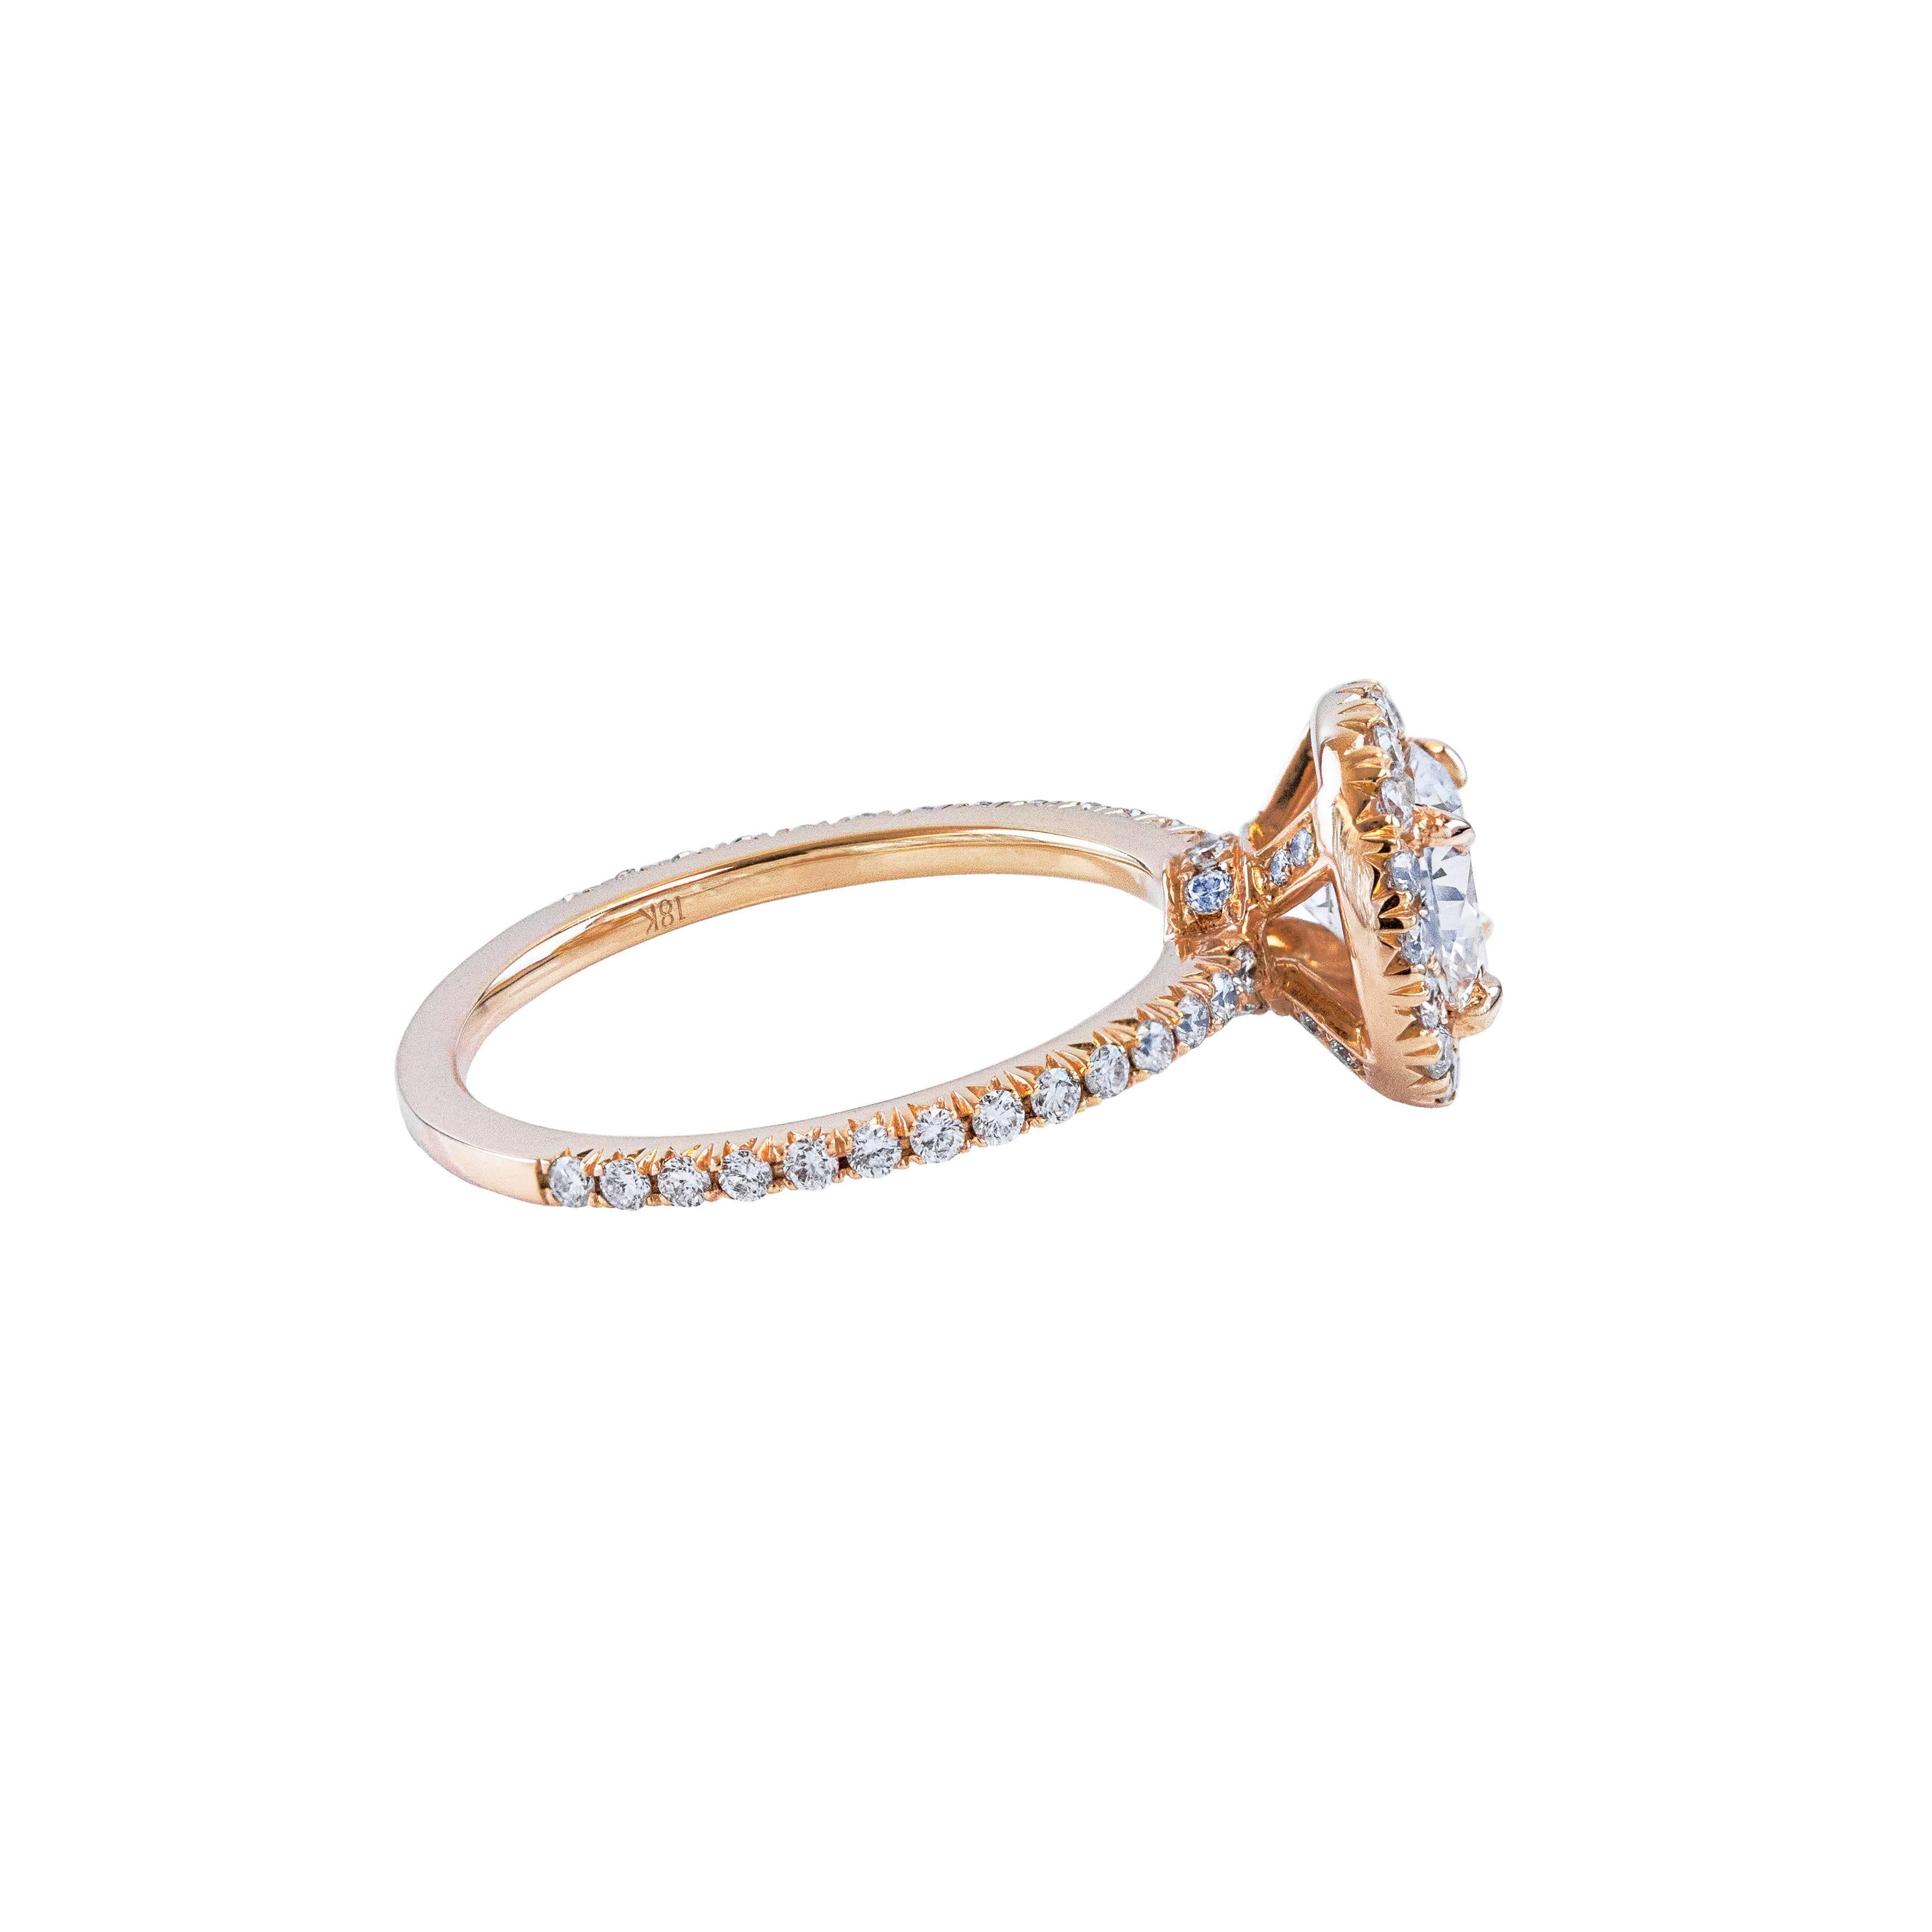 This ring features a well-crafted 1.07 carats brilliant round diamond center stone certified by EGL as E color and VS2 in clarity. Surrounded by round brilliant diamonds in a halo setting. Shank made in 18K Rose Gold is encrusted with diamonds set